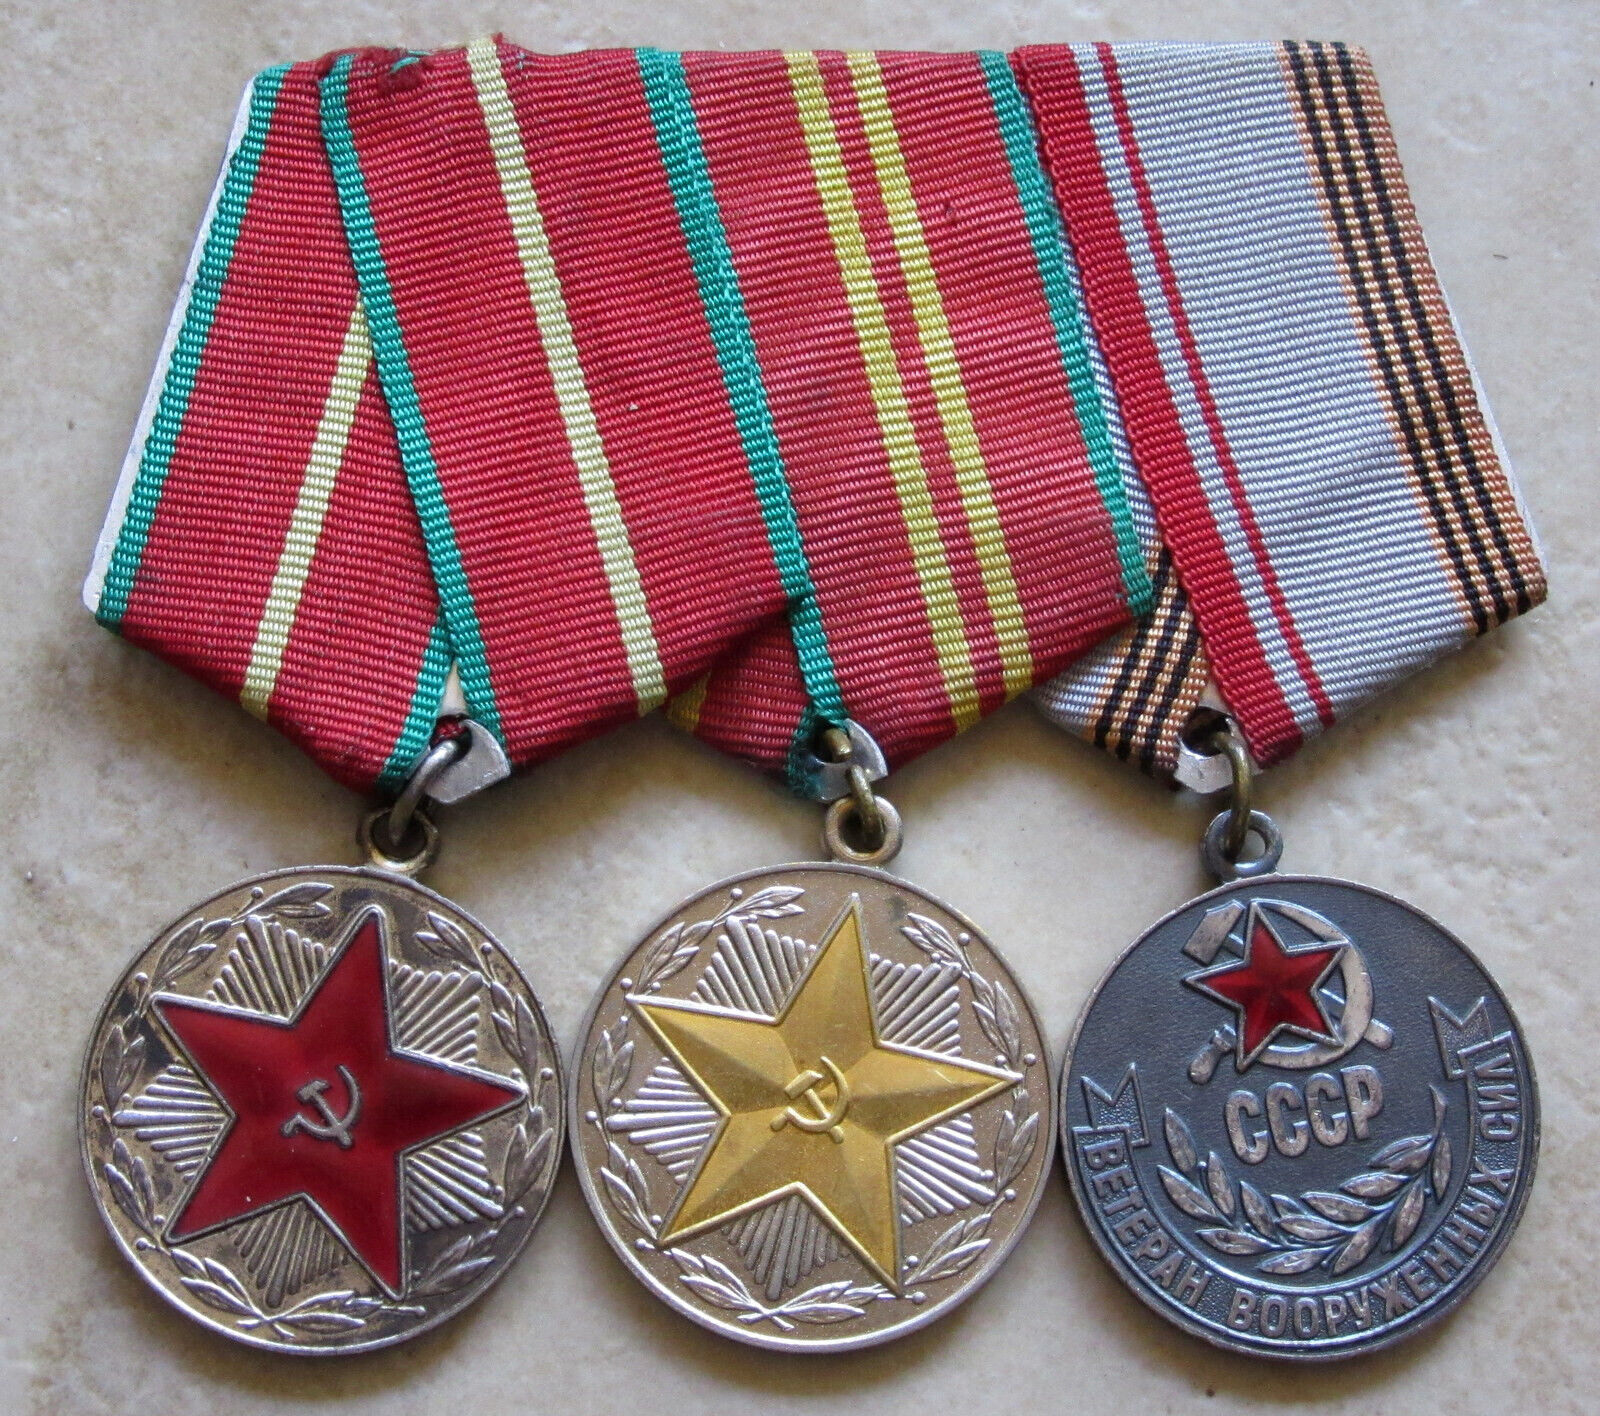 GROUP 3 RUSSIA USSR ARMY VETERAN & REPROACHABLE SERVICE MEDALS ON ONE SUSPENSION